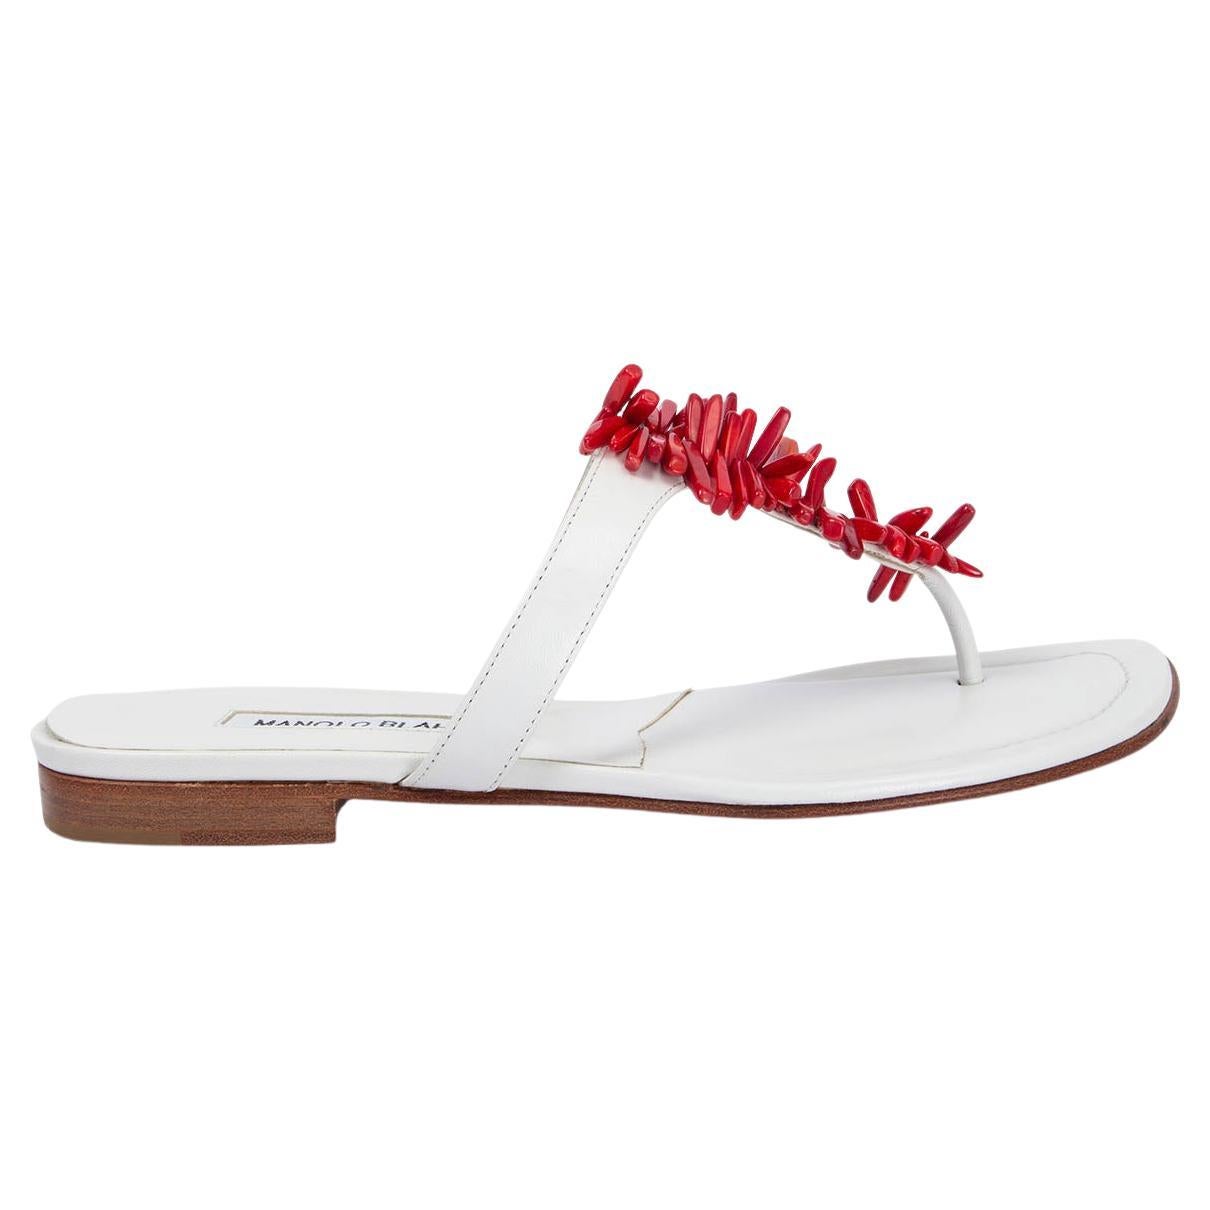 MANOLO BLAHNIK white leather CORAL BEADED Flat Thong Sandals Shoes 36.5